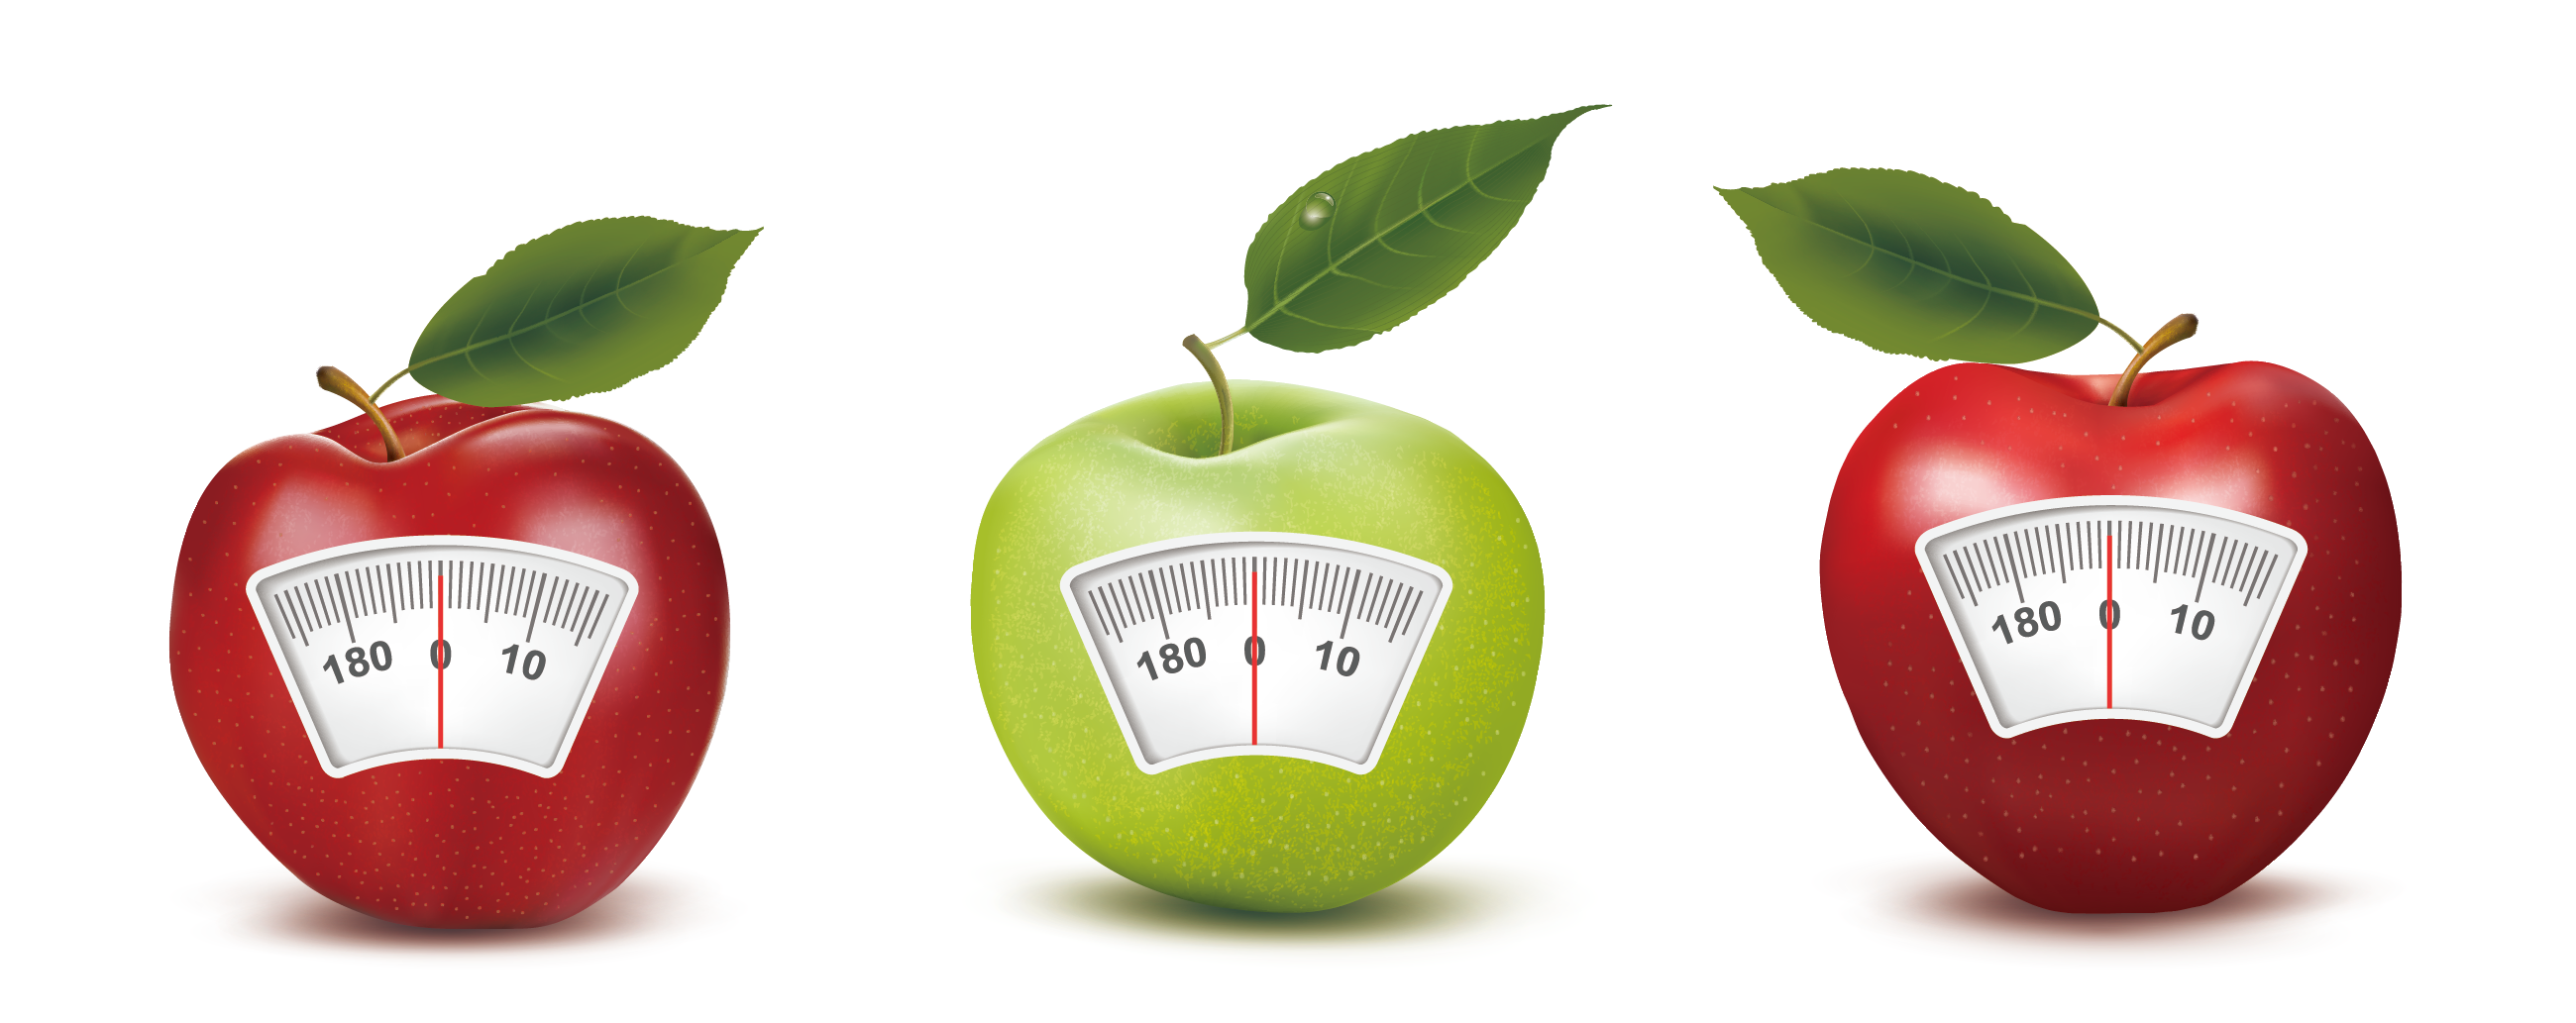 Weighing scale - Creative Apple Weighing 2600*1033 transprent Png ...